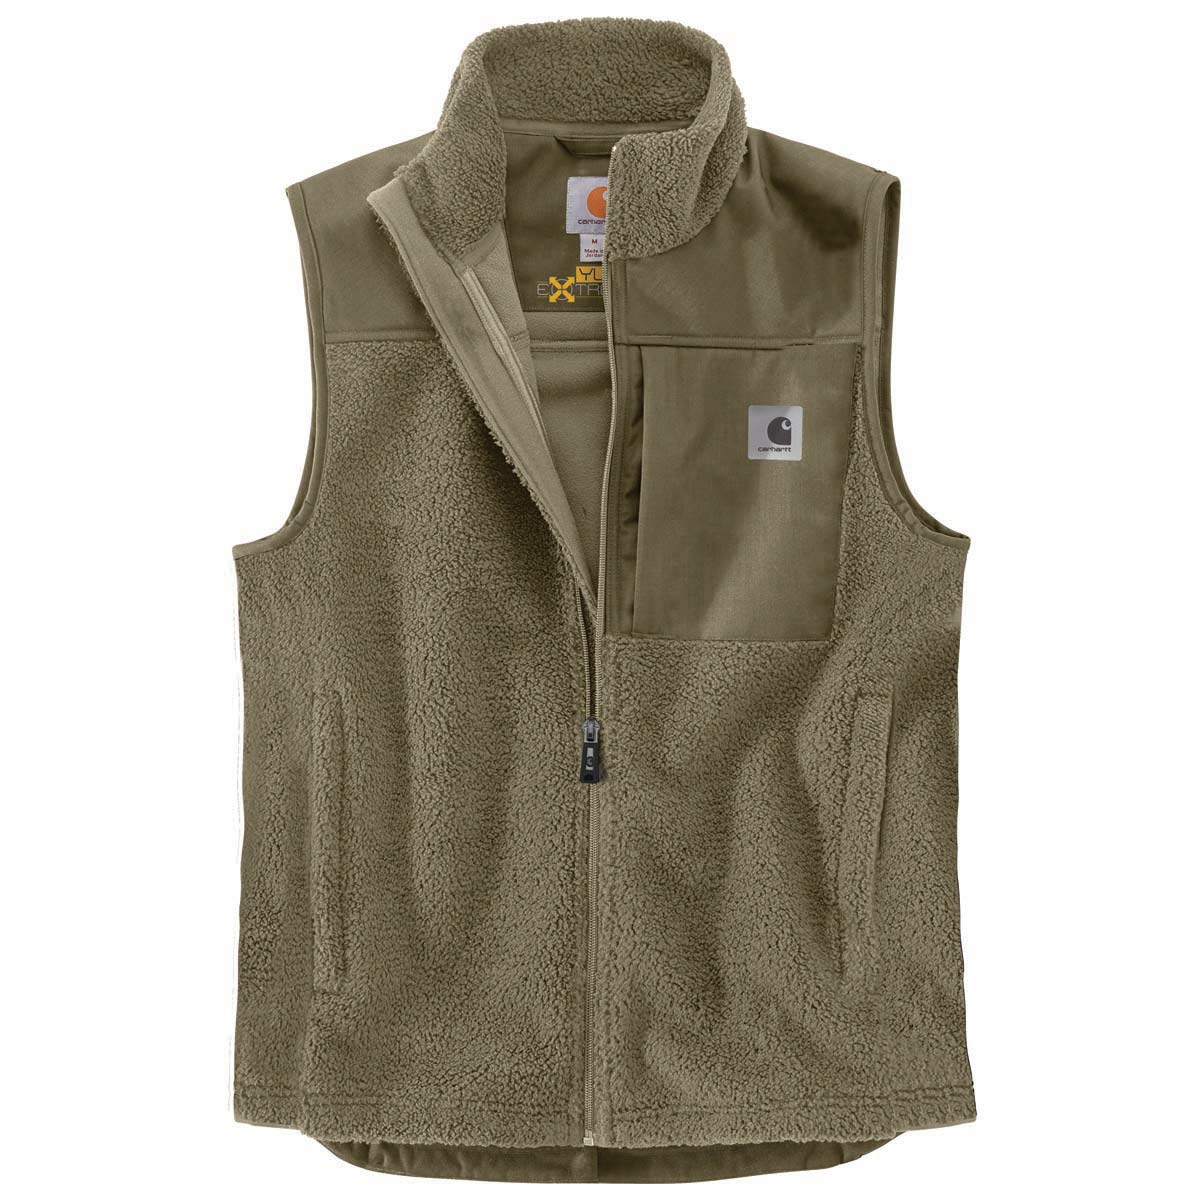 Carhartt Men's Yukon Extremes Wind Fighter Fleece Vest - Discontinued Pricing